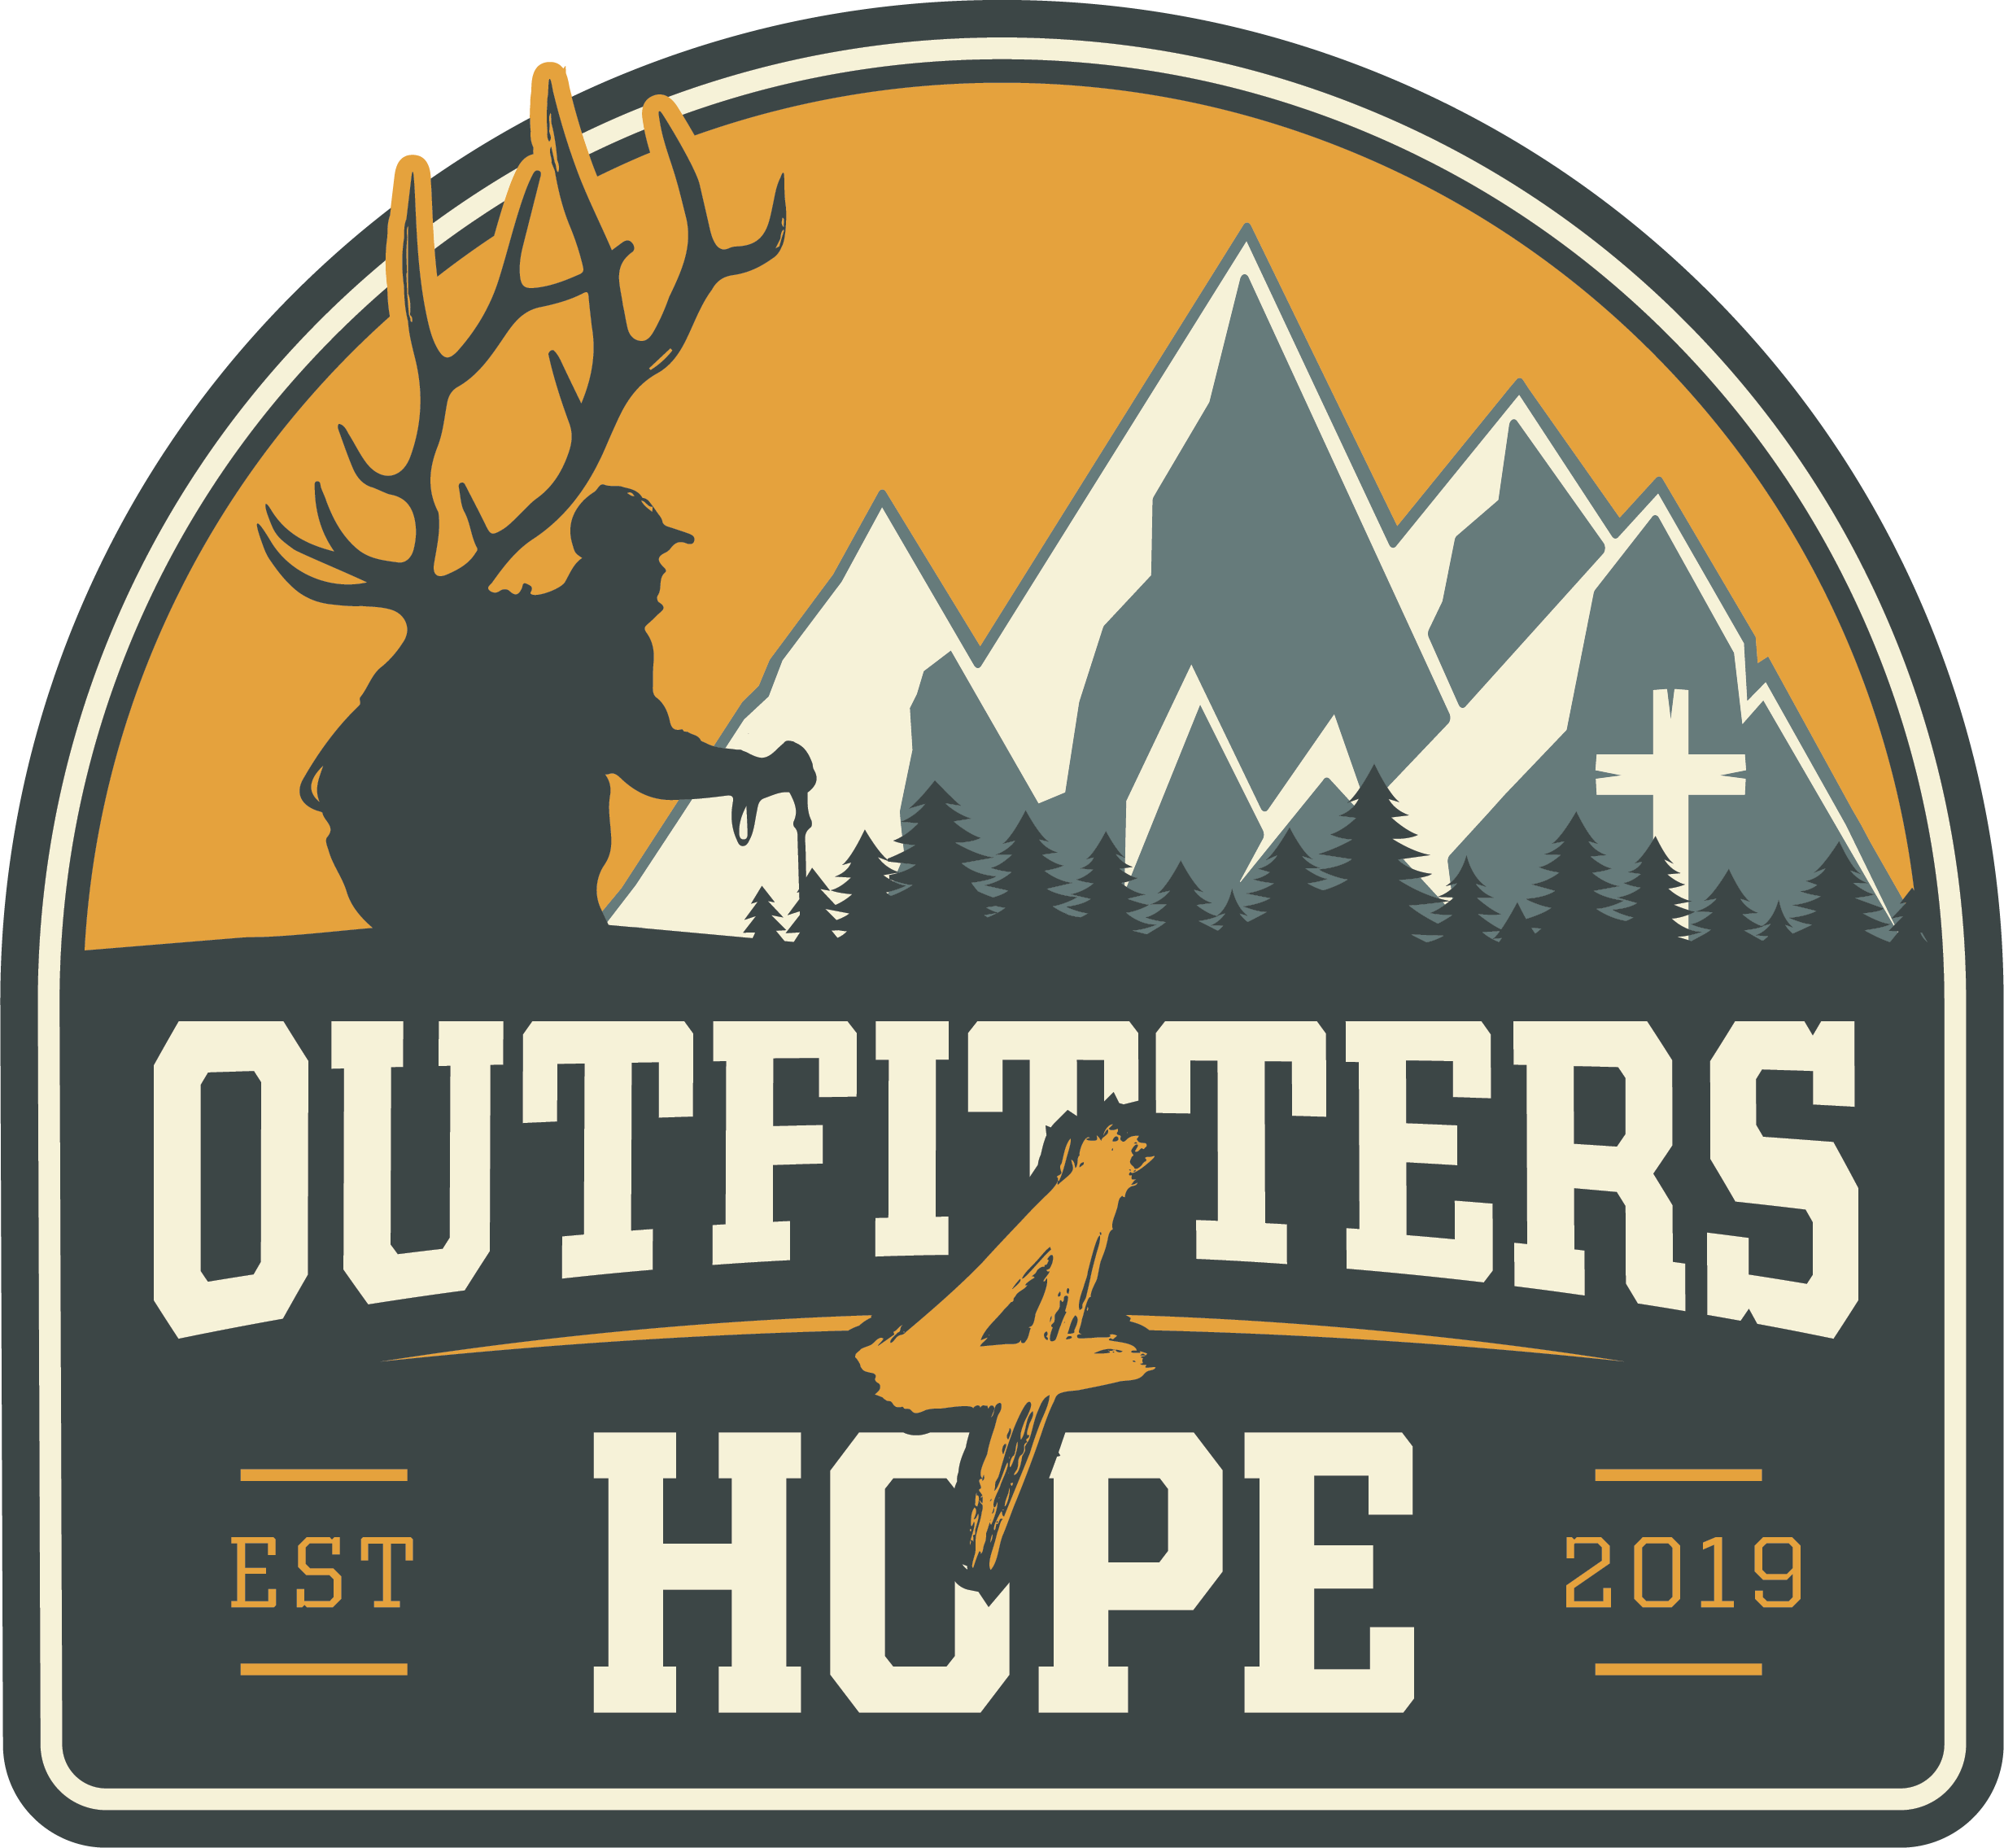 Outfitters 4 Hope